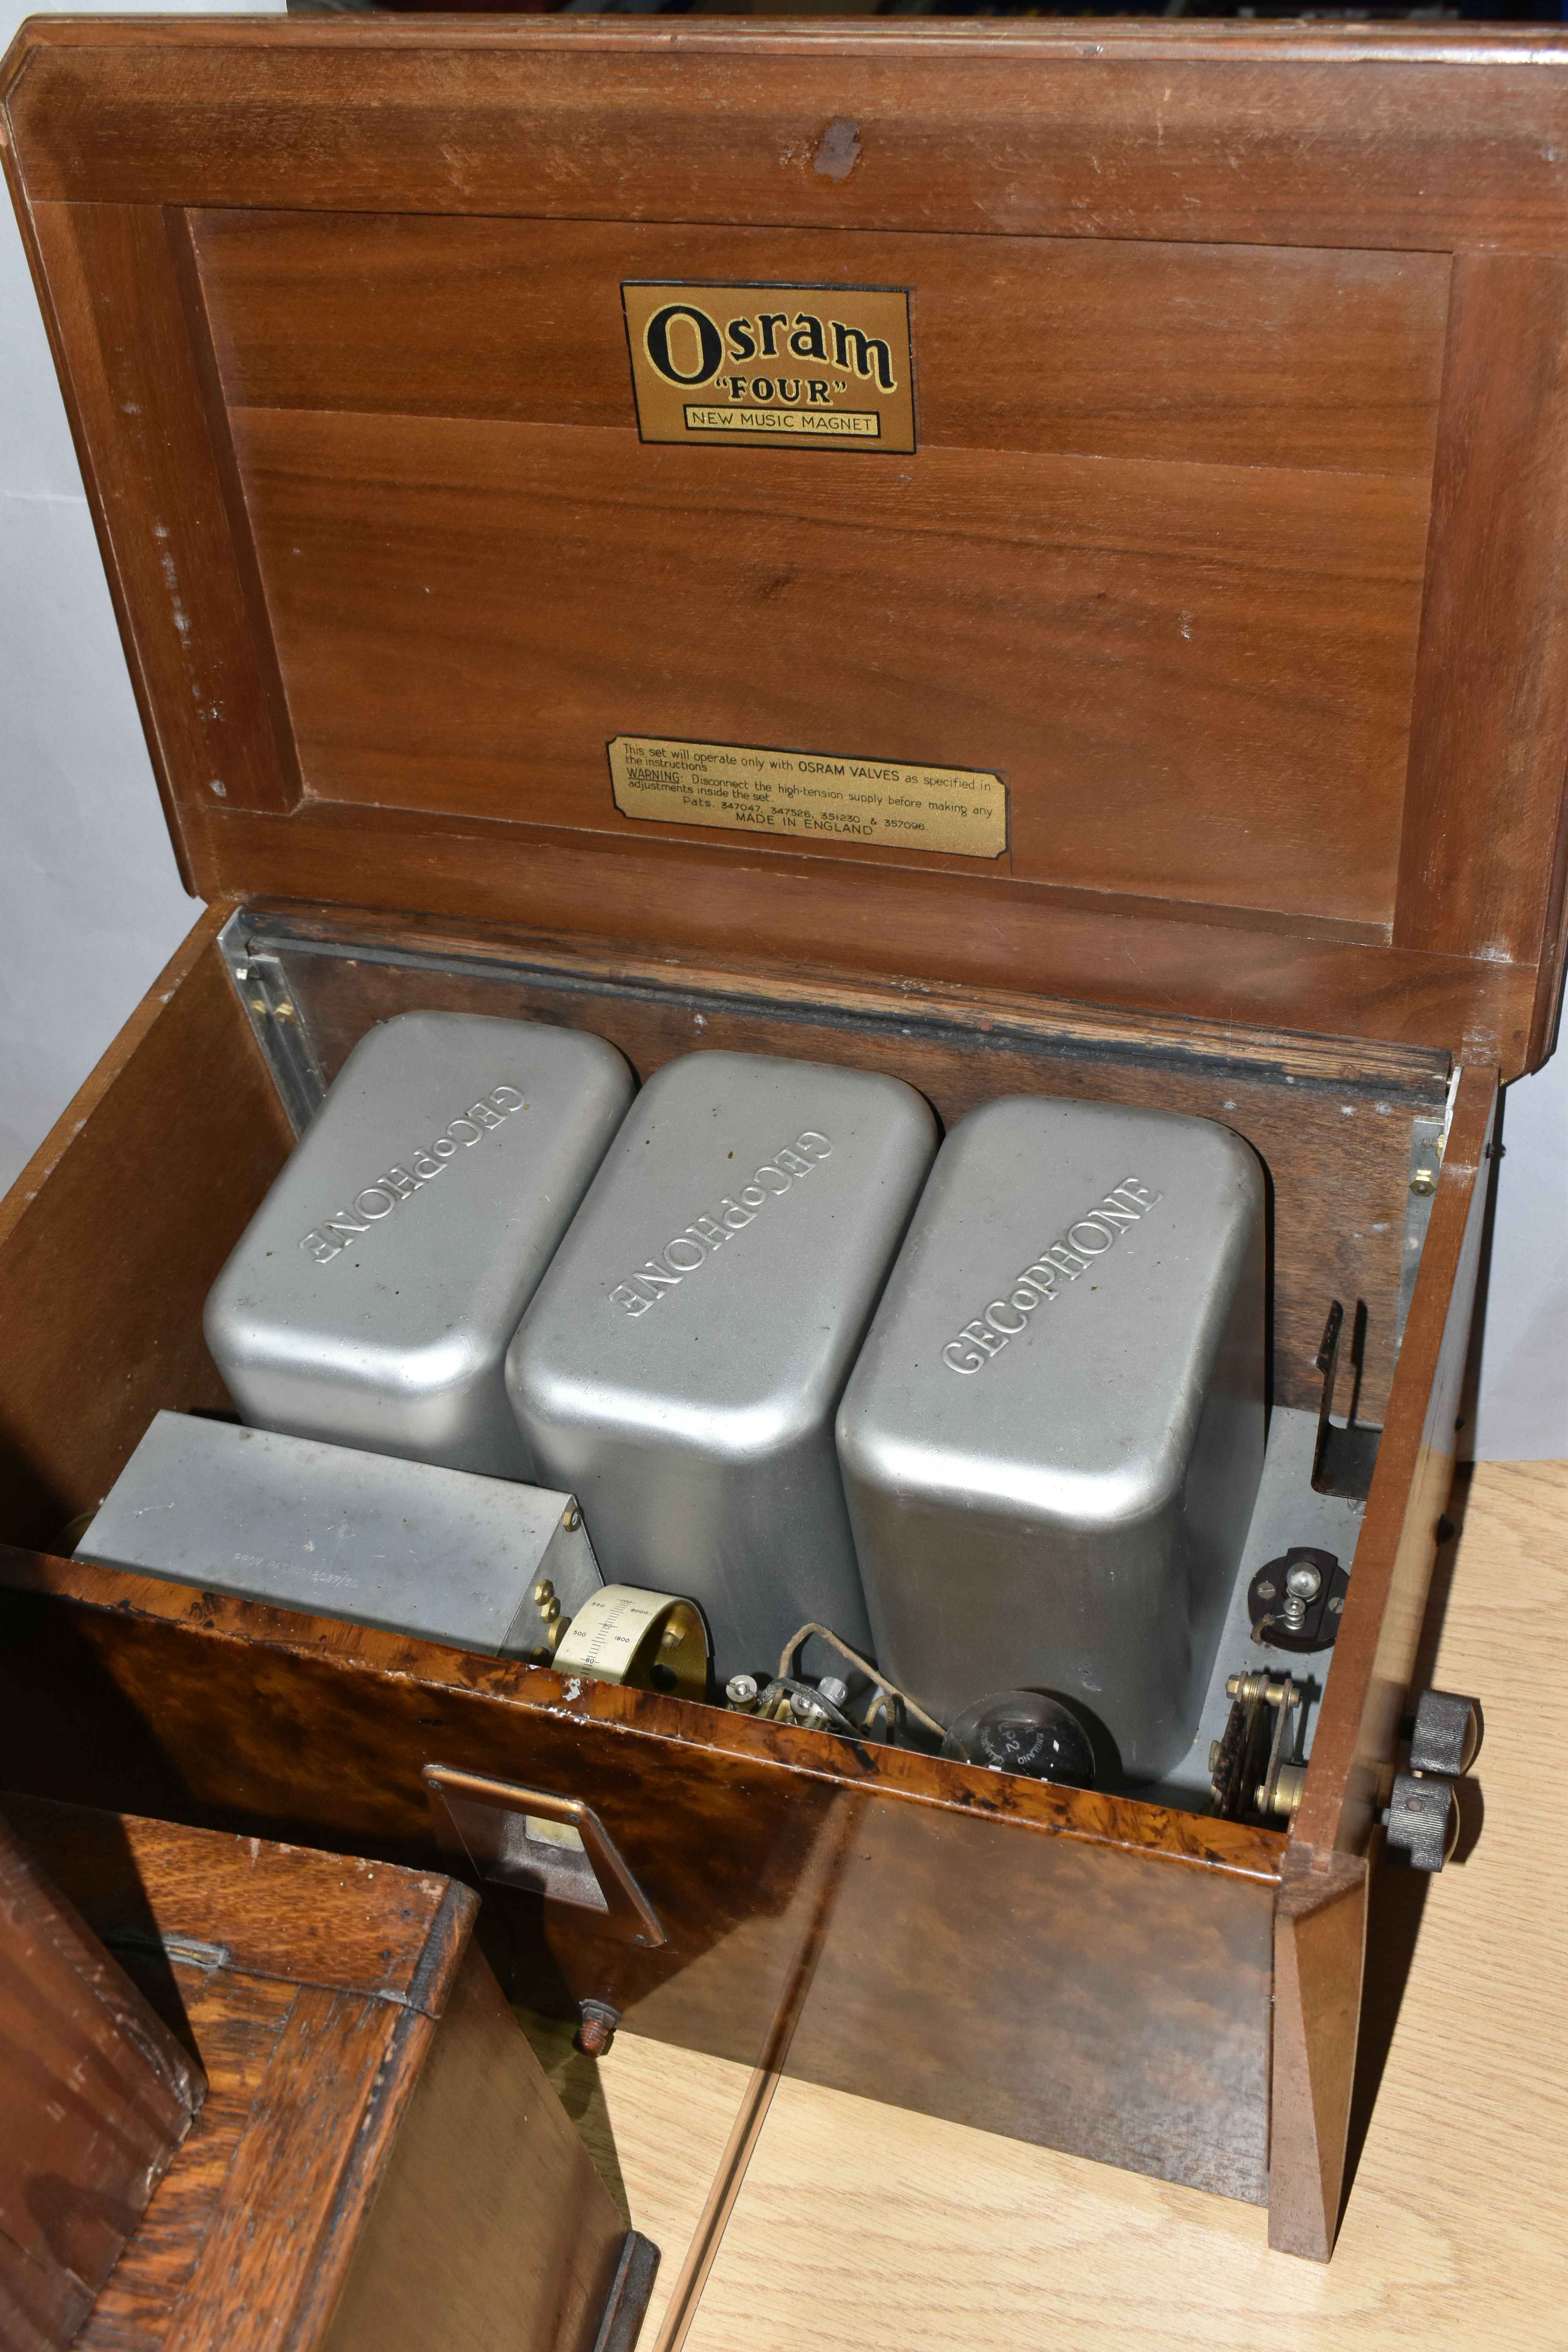 AN OSRAM 'FOUR' NEW MUSIC MAGNET RADIO, a Marconi radio, one other unmarked radio set and a wooden - Image 12 of 16